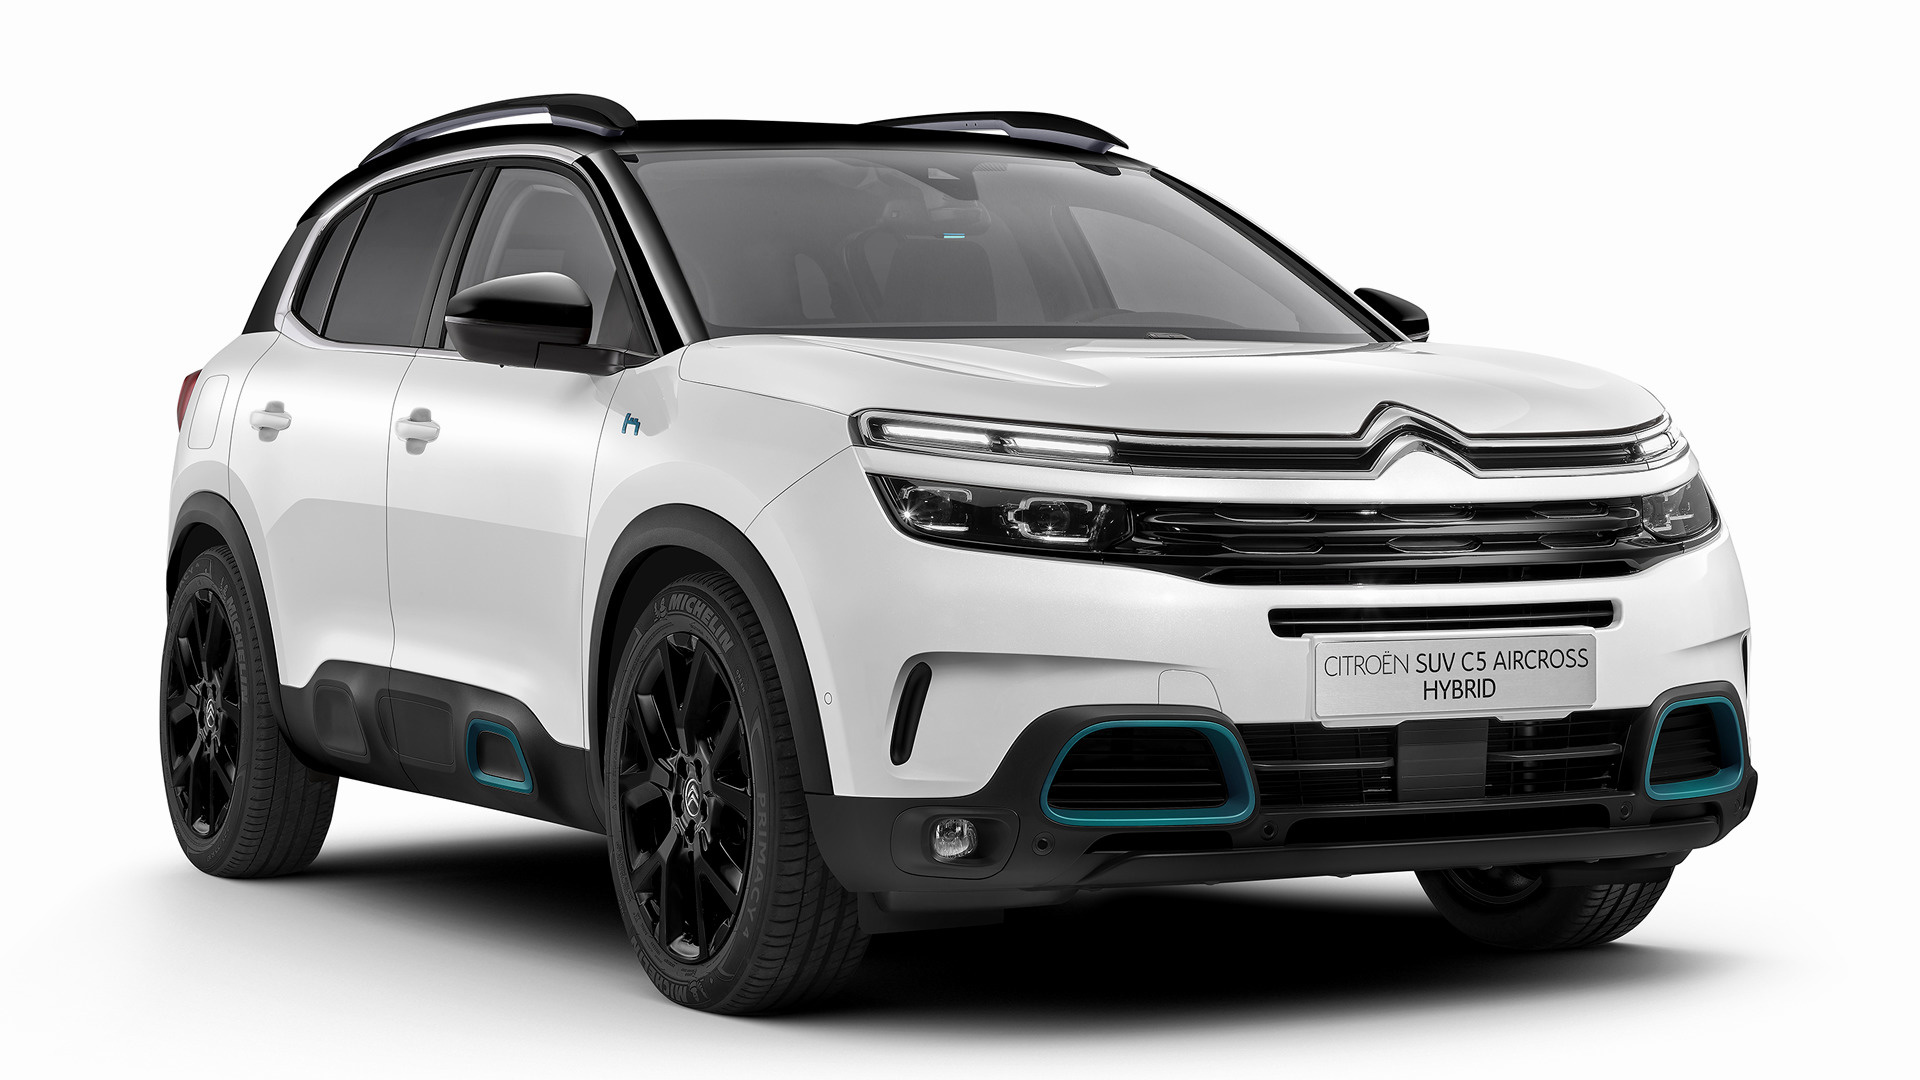 2020 Citroen C5 Aircross Hybrid - Wallpapers and HD Images | Car Pixel